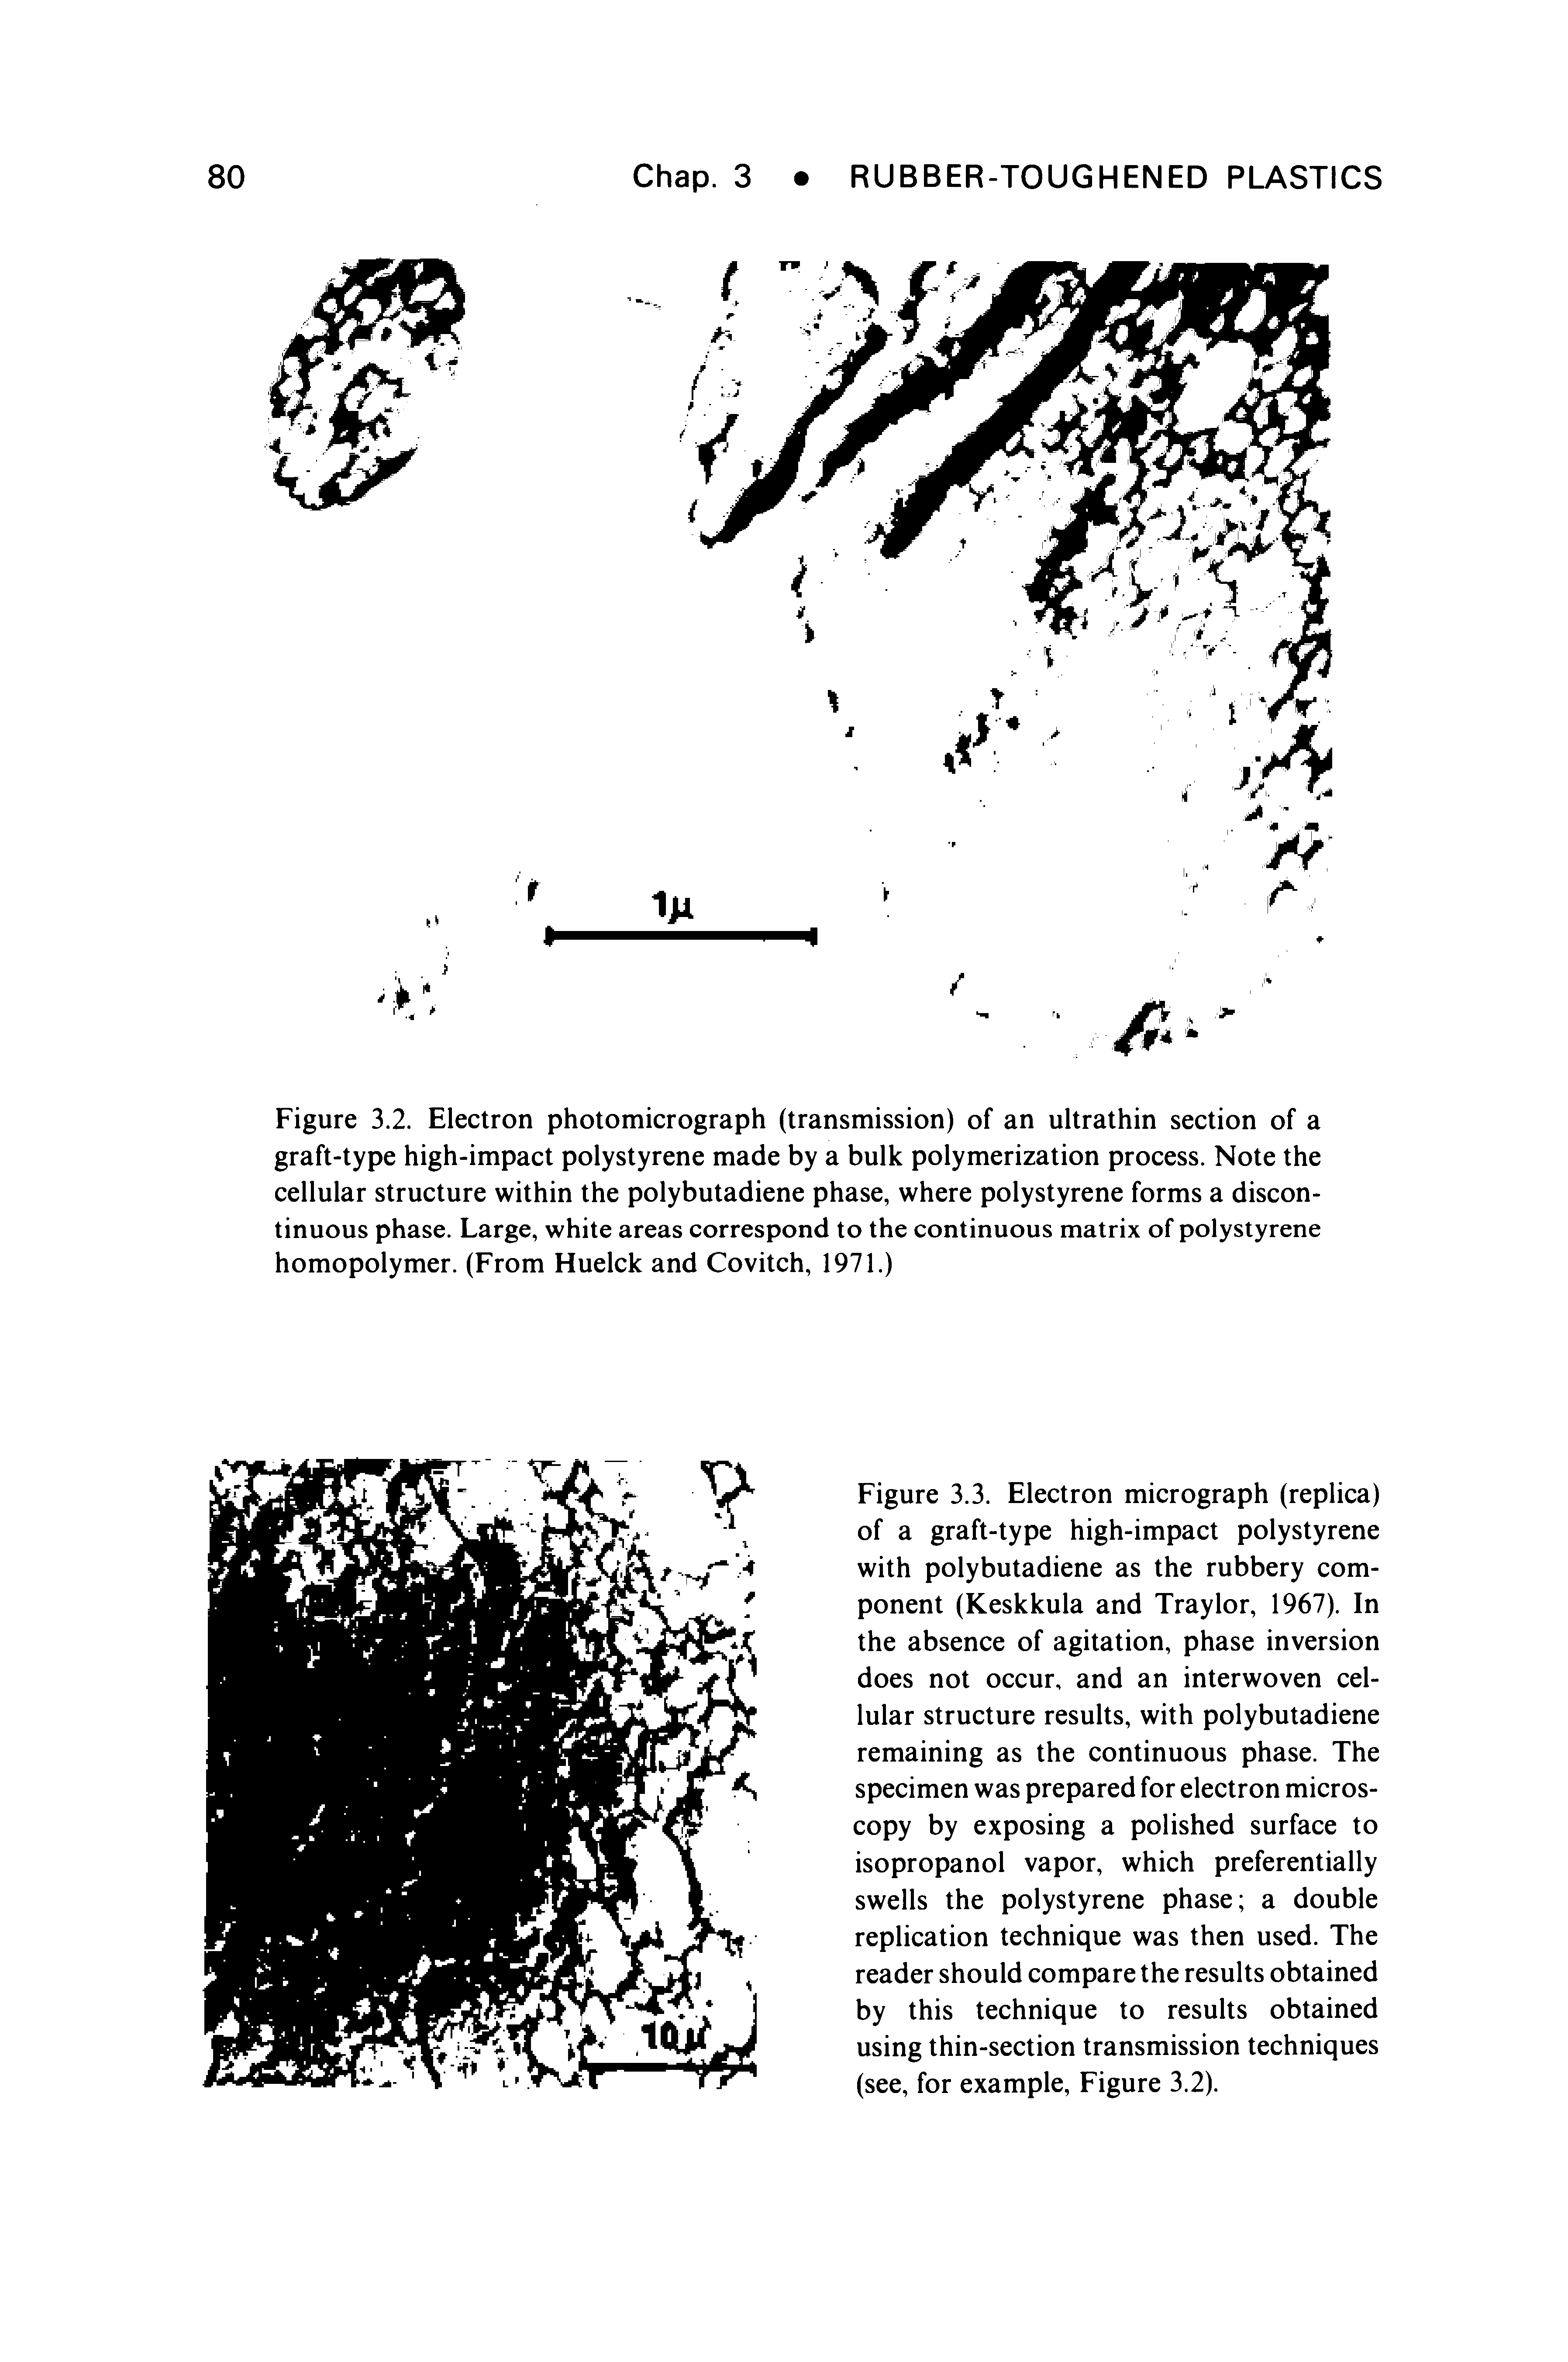 Figure 3.3. Electron micrograph (replica) of a graft-type high-impact polystyrene with polybutadiene as the rubbery component (Keskkula and Traylor, 1967). In the absence of agitation, phase inversion does not occur, and an interwoven cellular structure results, with polybutadiene remaining as the continuous phase. The specimen was prepared for electron microscopy by exposing a polished surface to isopropanol vapor, which preferentially swells the polystyrene phase a double replication technique was then used. The reader should compare the results obtained by this technique to results obtained using thin-section transmission techniques (see, for example. Figure 3.2).